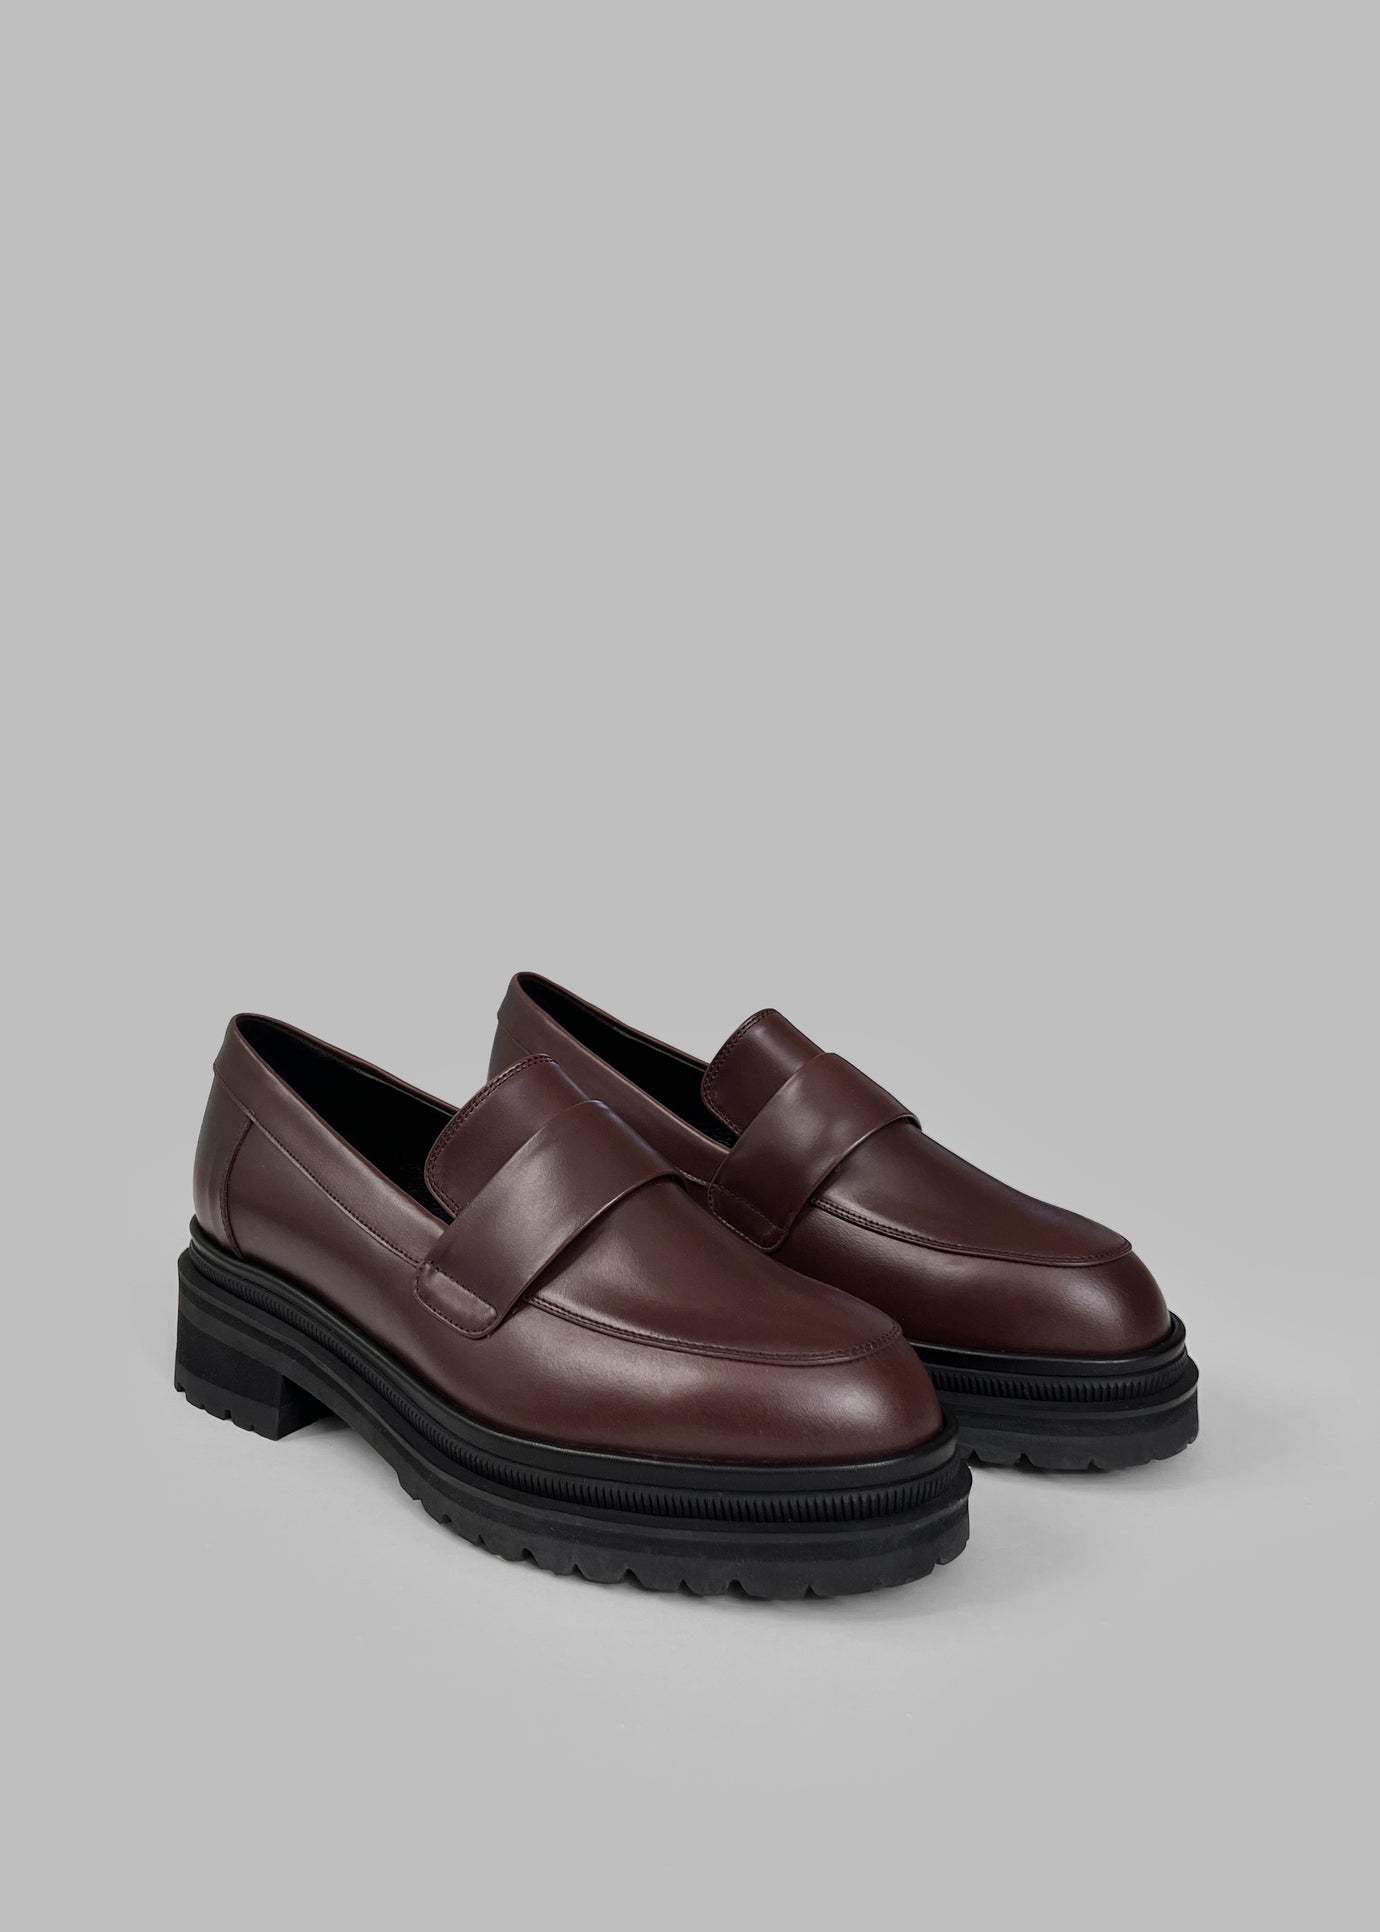 Reese Leather Loafers - Brown